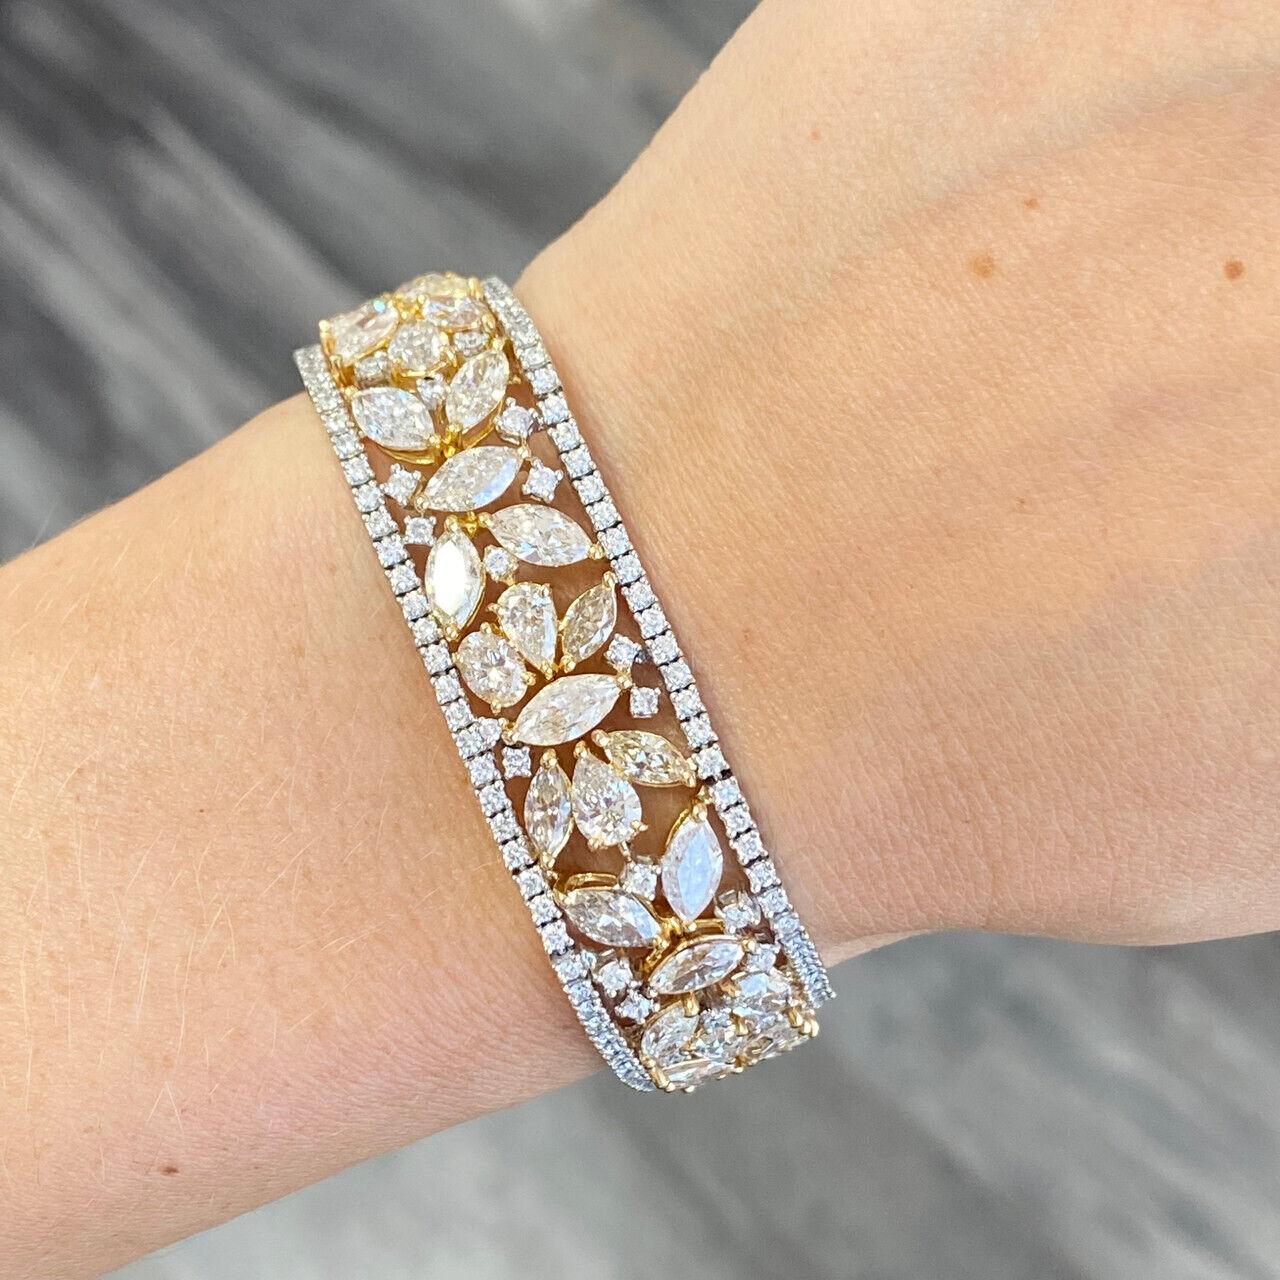 Specifications:
Custom made in Los Angeles, CA
Metal: 14K Yellow Gold  
Weight: 38.74 Gr
Main Stone: Marquise cut diamond 24.05cttw  
Side Stones: Round Diamonds 3.24 ctw
Color: Near Colorless
Clarity: Included
Length: 7 Inch